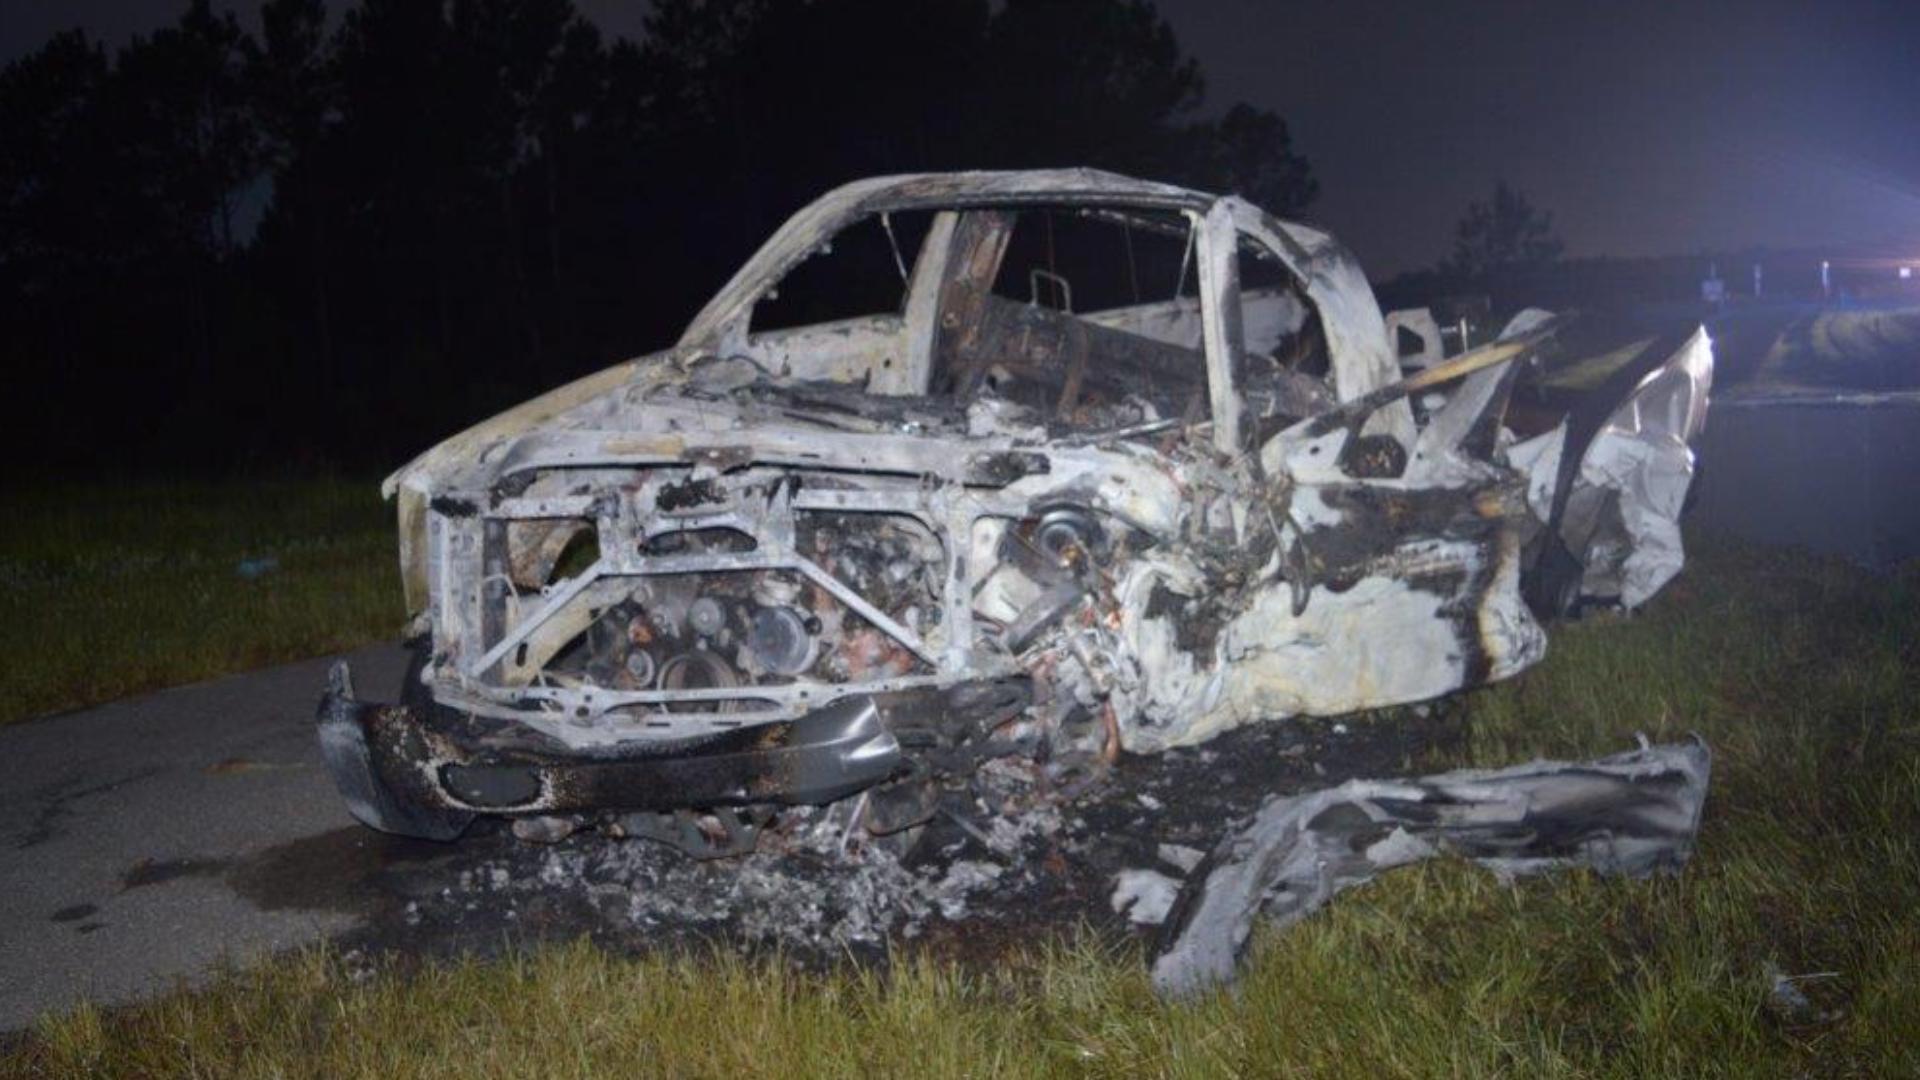 Two cars collided head-on with one of them flipping and bursting into flames, troopers said.